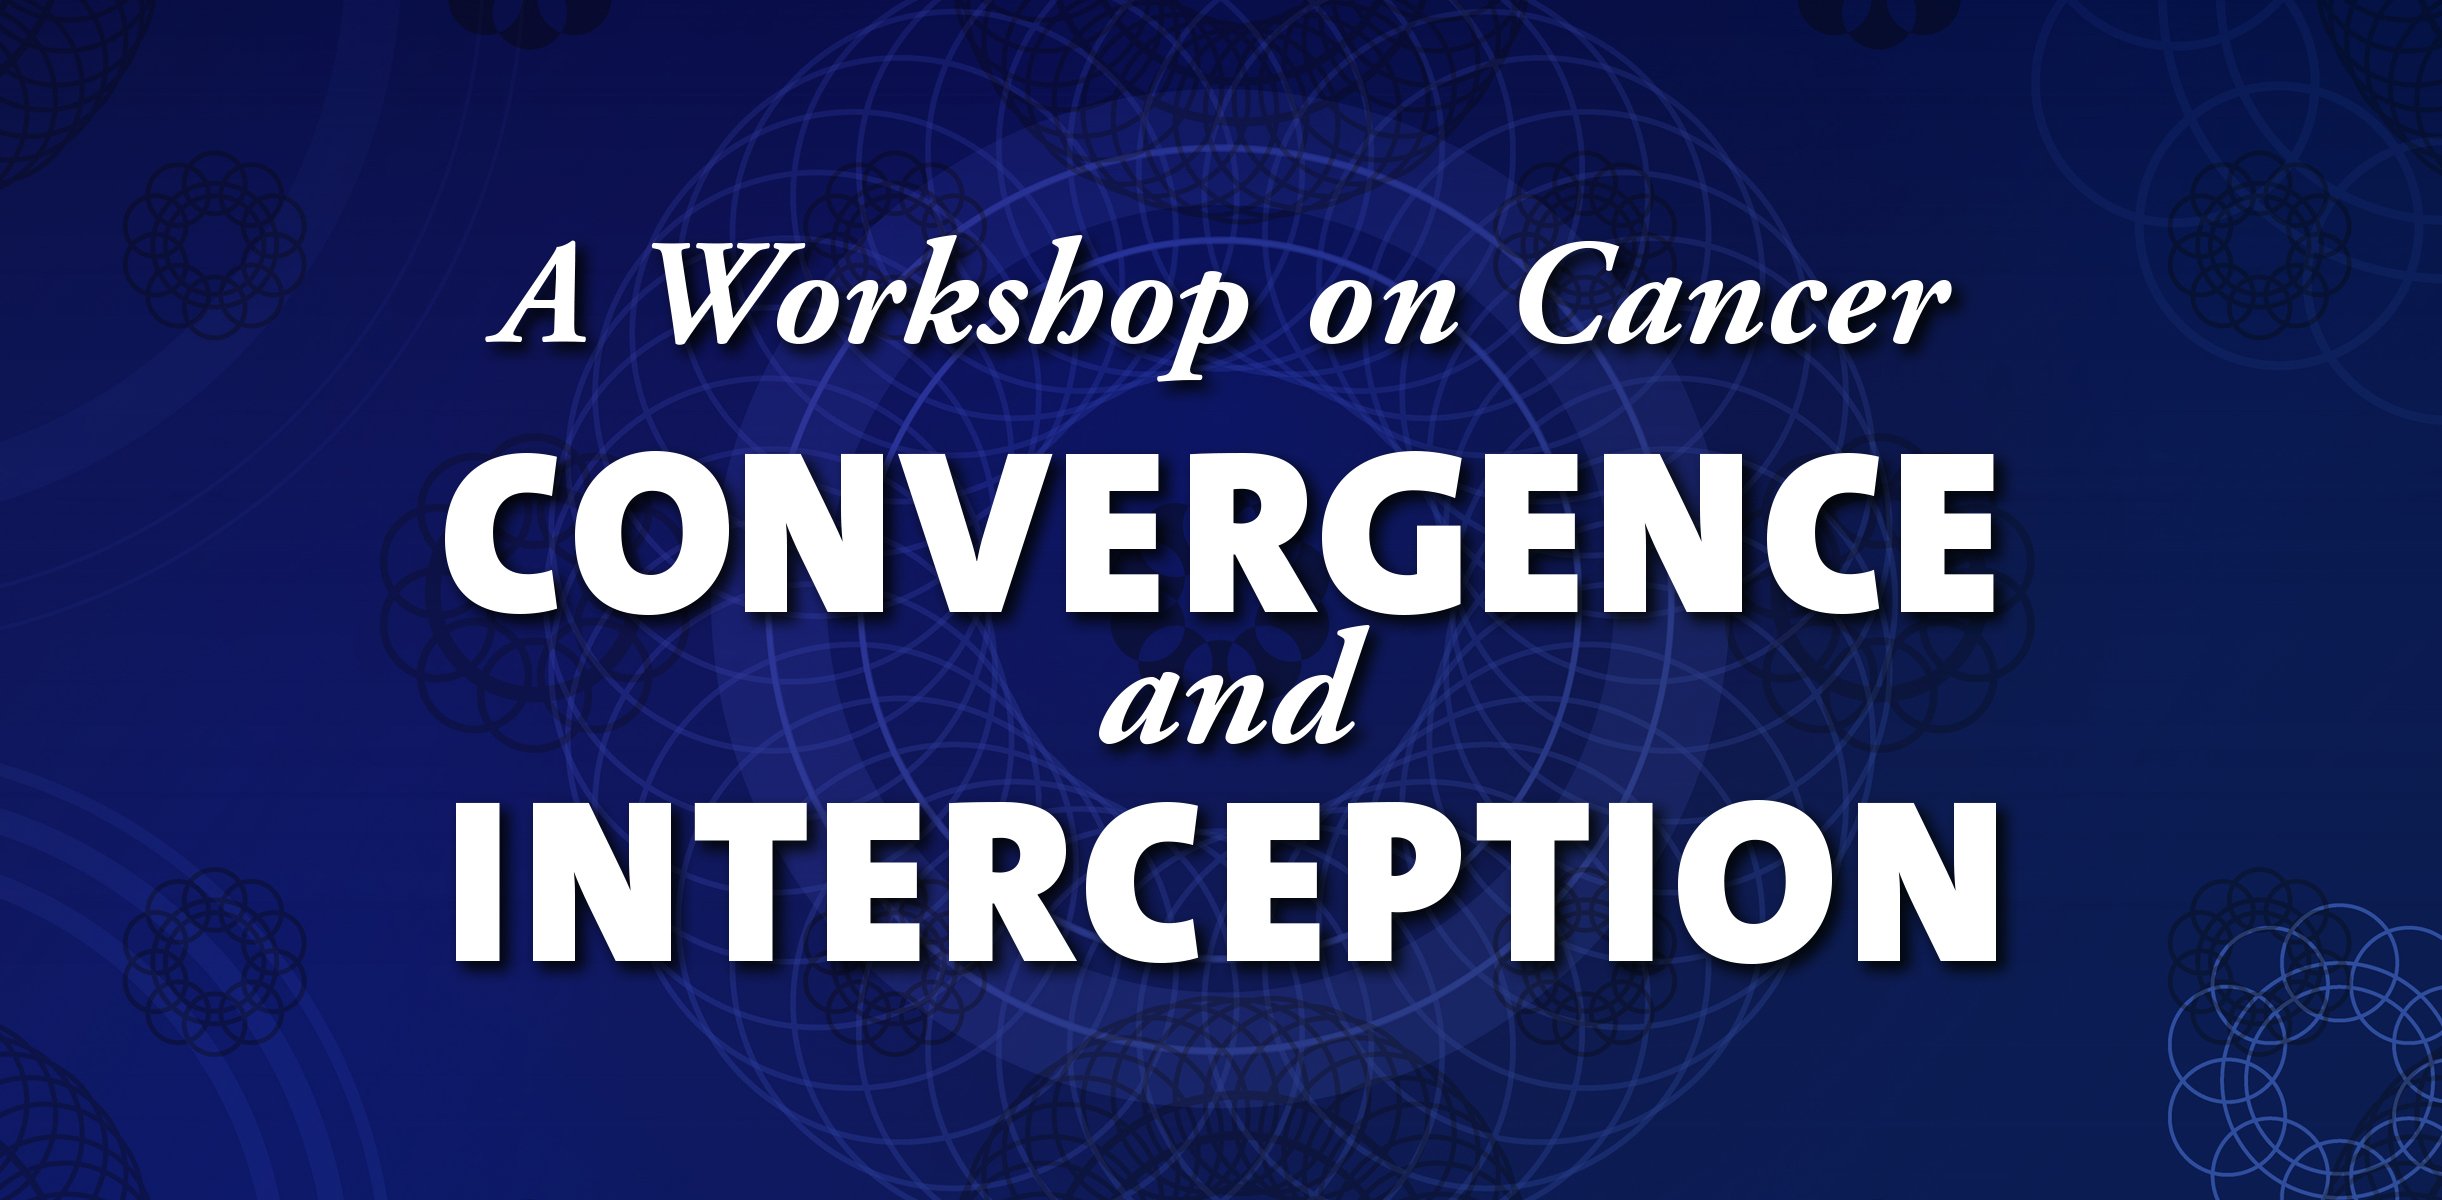 Virtual Meeting Screen (example 8 of 8) with Logo for Academic Cancer Workshop – designed and produced by SP STUDIOS.